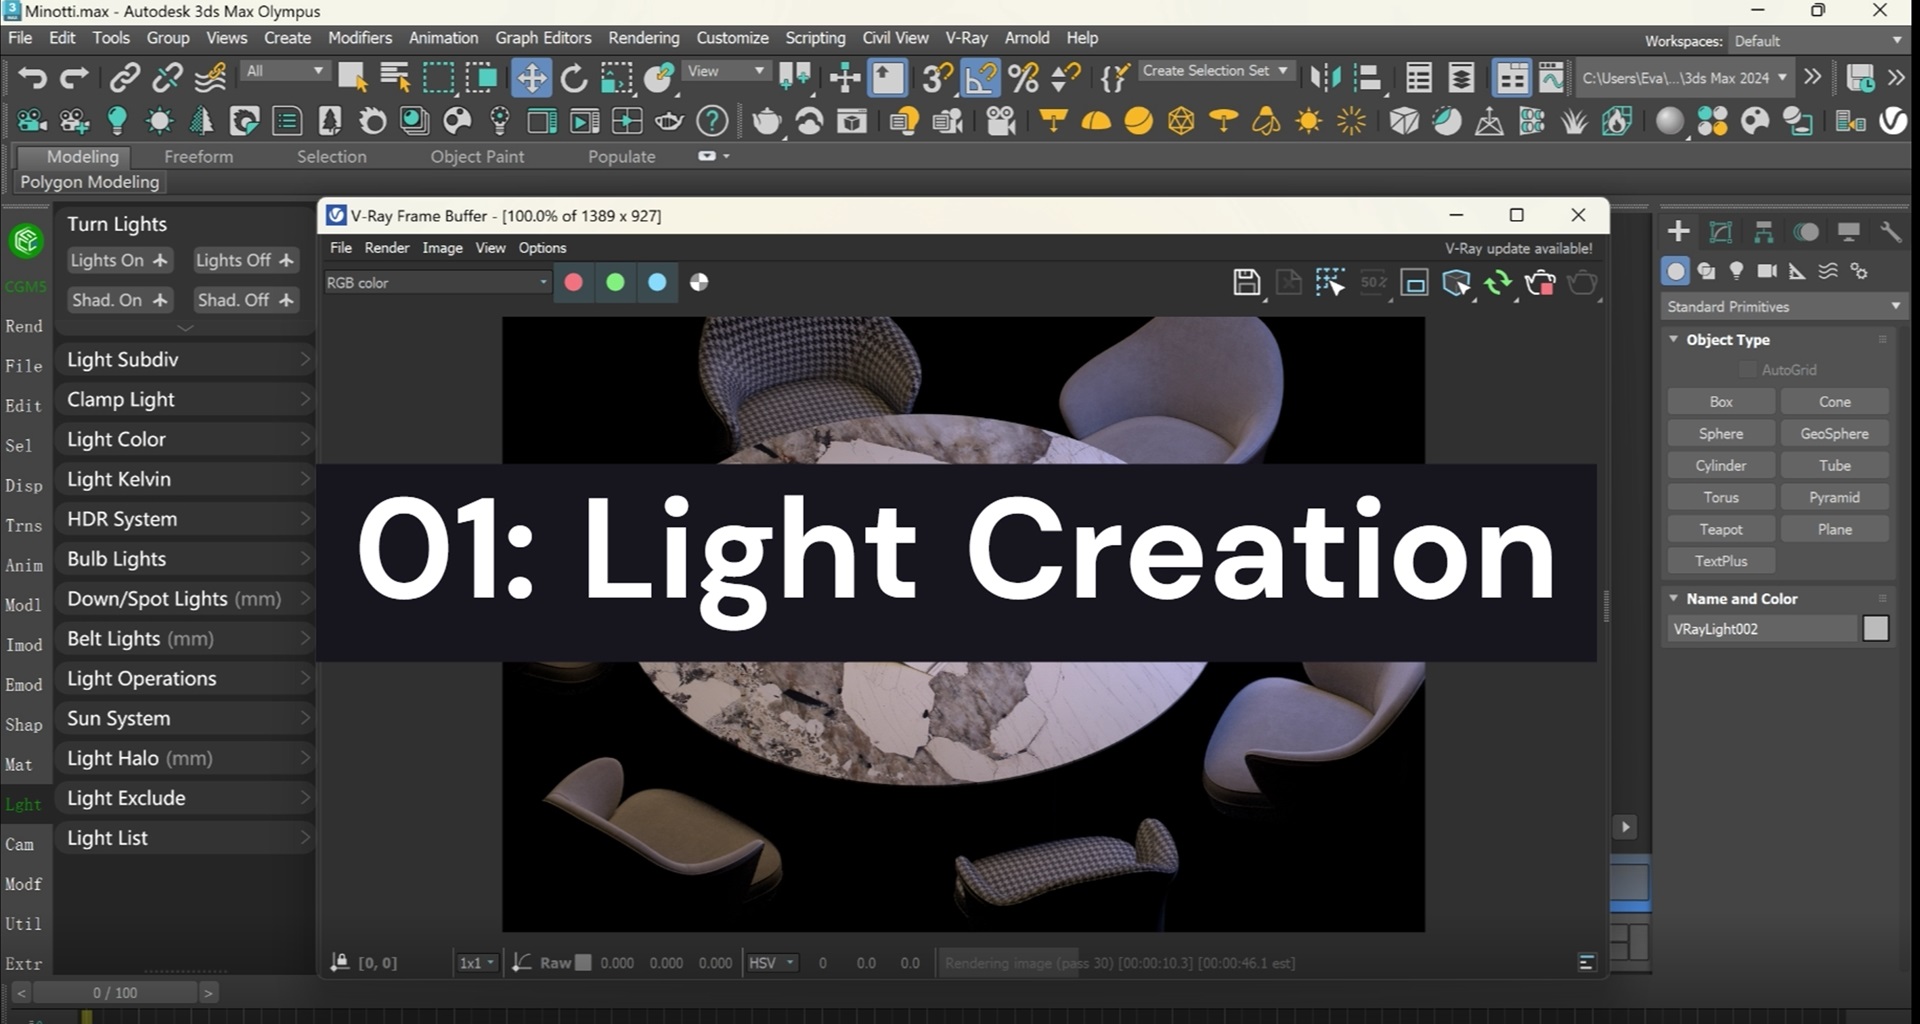 CG Magic: All-in-one Tool Set to Improve Light Creation in 3ds Max